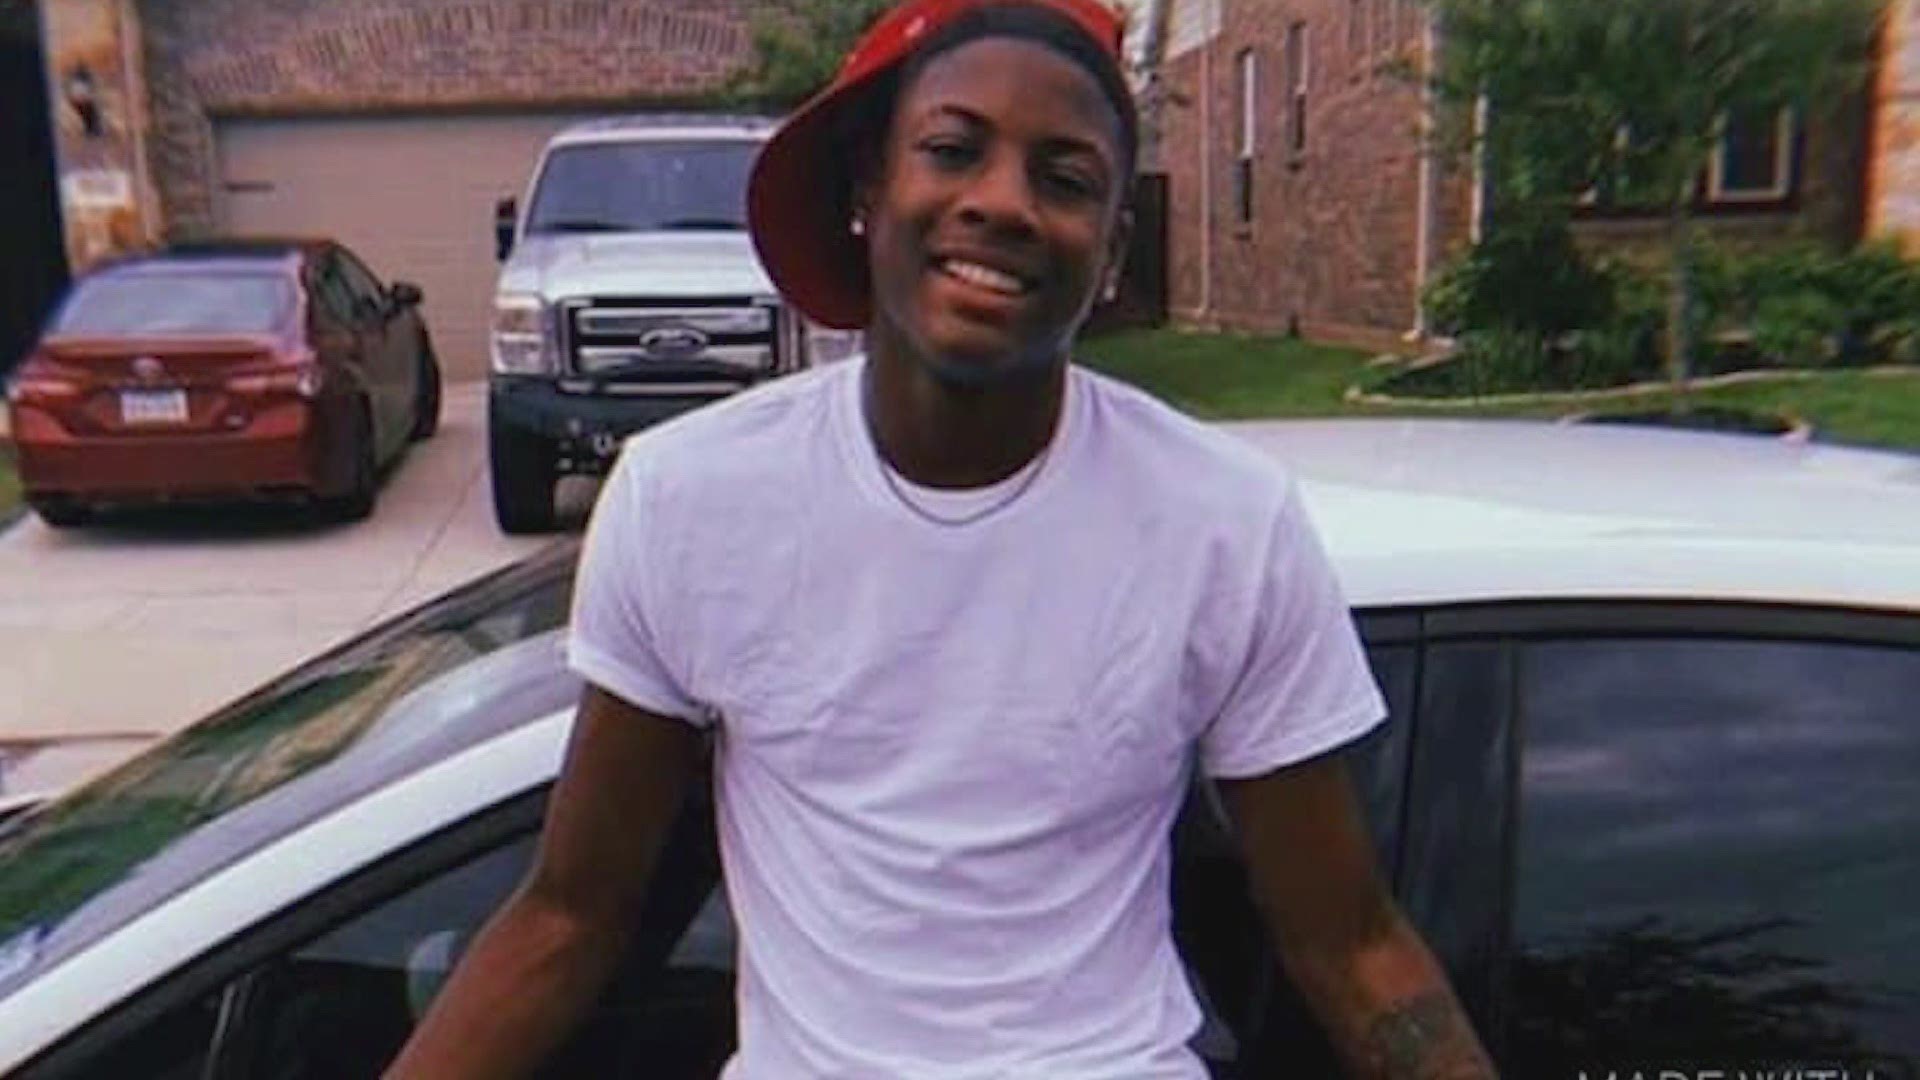 Dallas police say 17-year-old Demajai Oliver appeared to have been hit by multiple vehicles and killed.